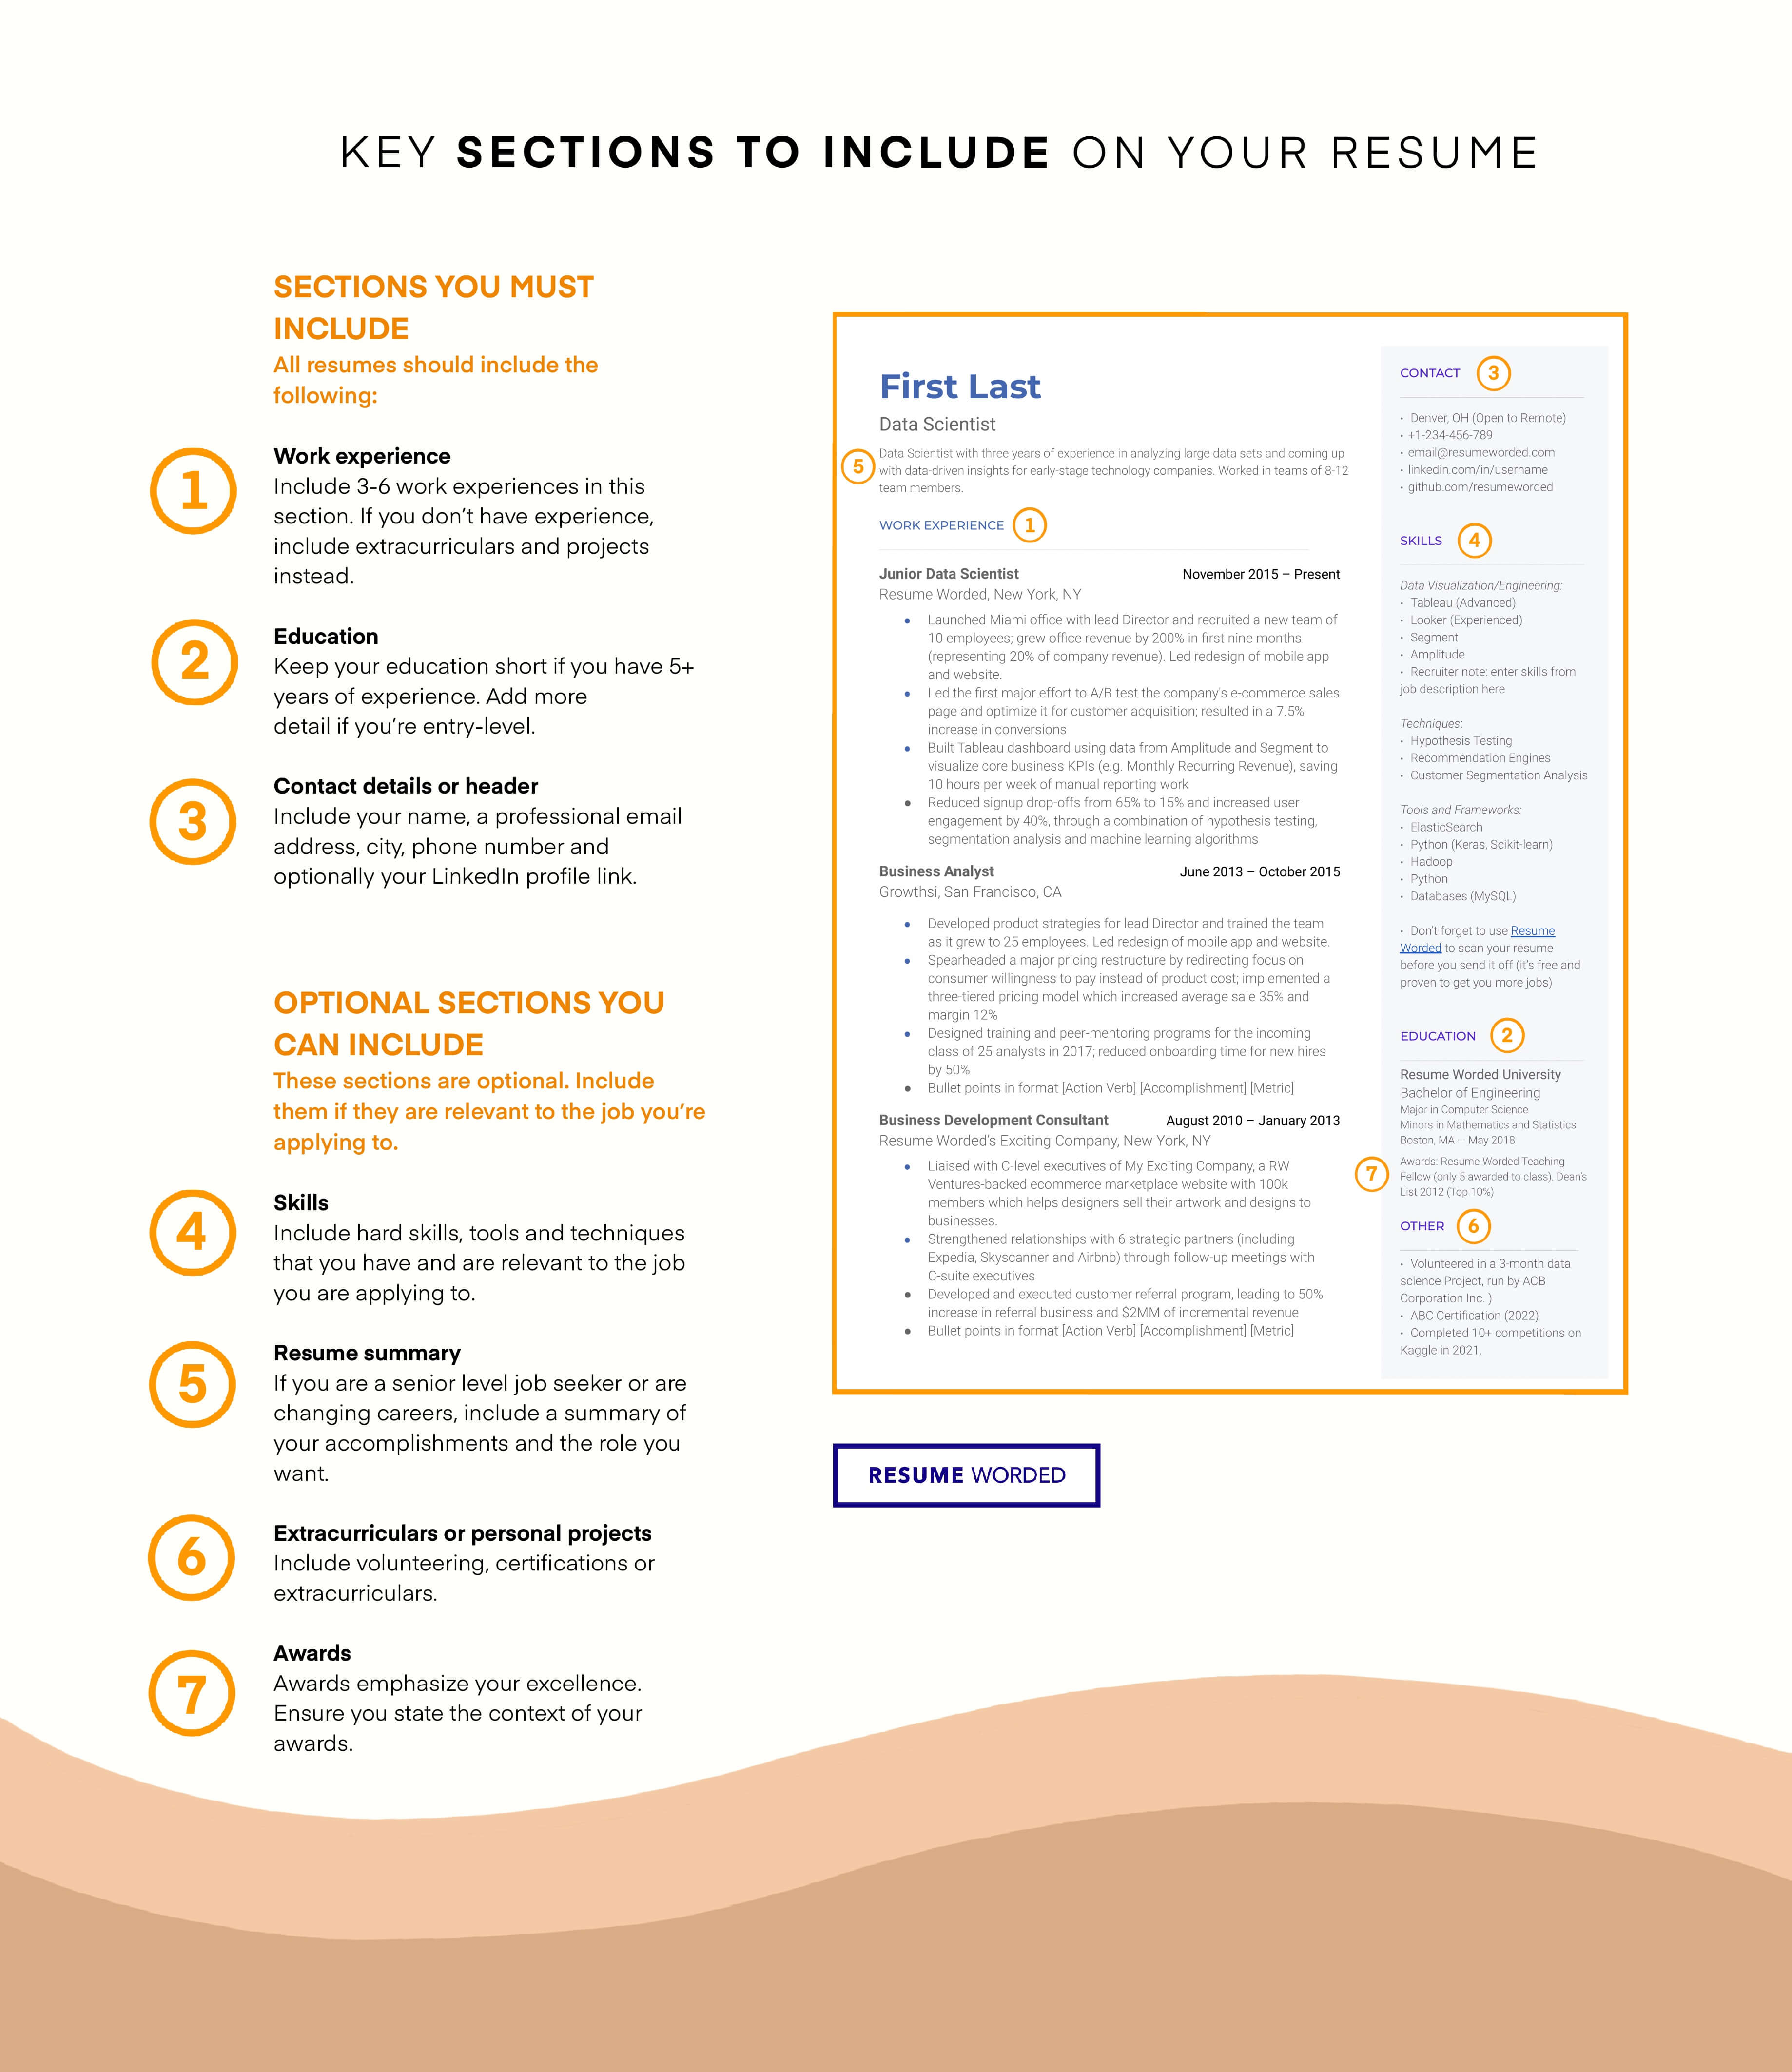 Include key achievements in your introduction section. - Revenue Auditor Resume